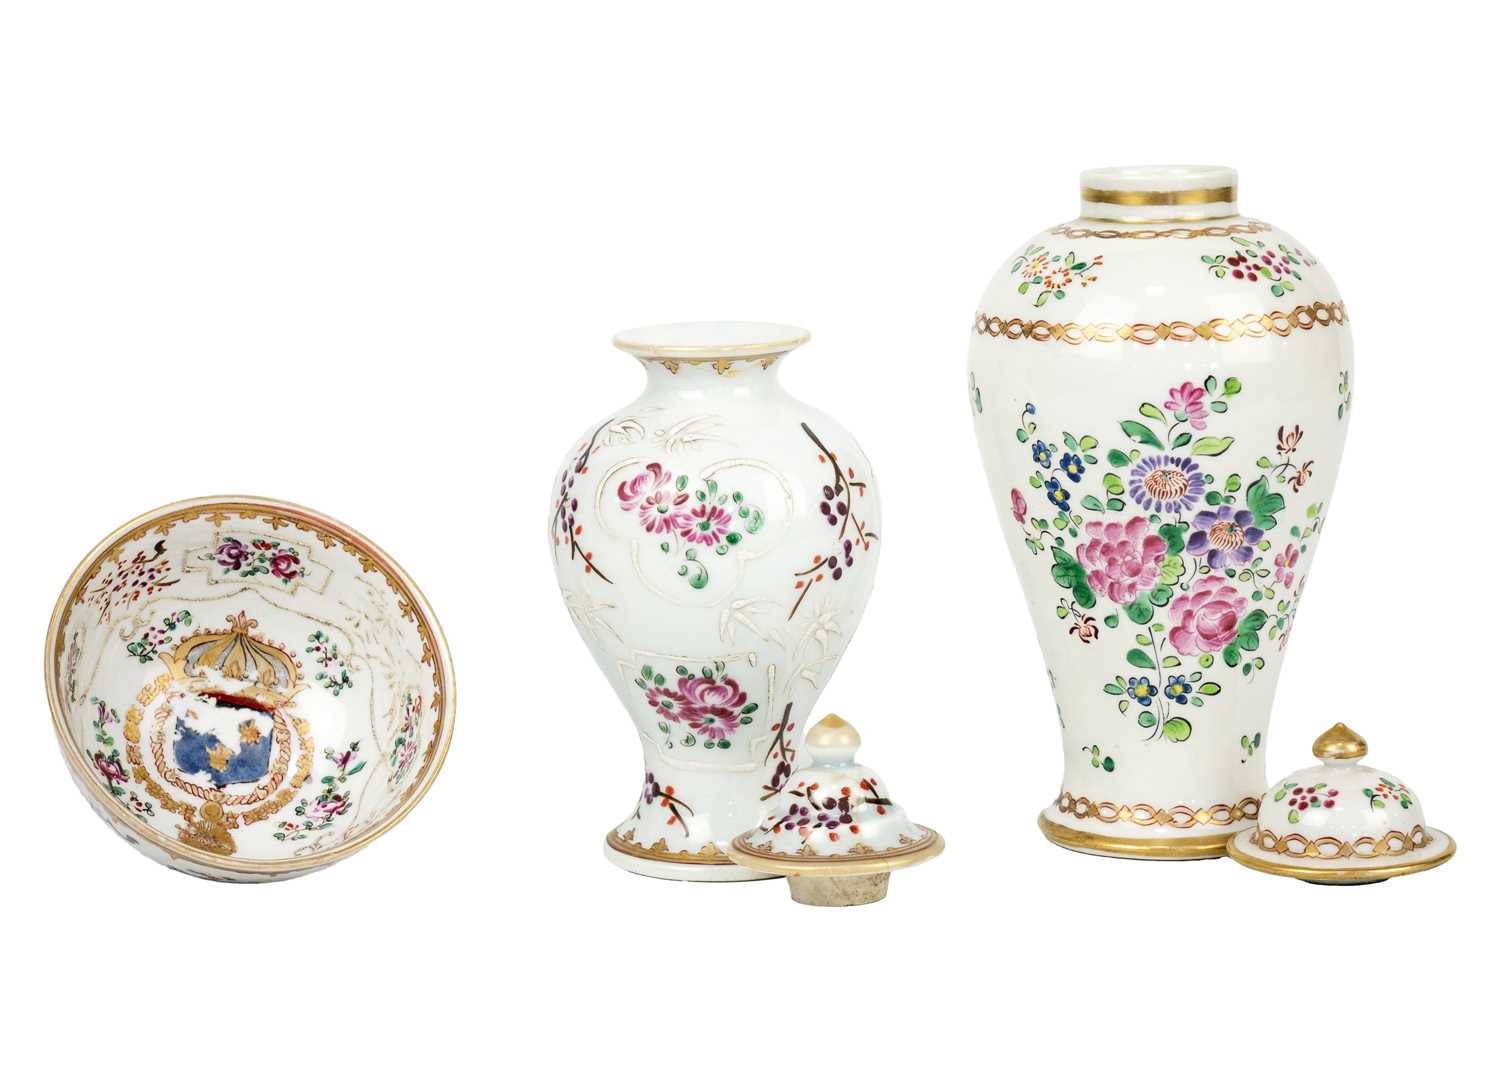 Two Samson porcelain famille rose vases, in Chinese export style, circa 1900. - Image 3 of 12